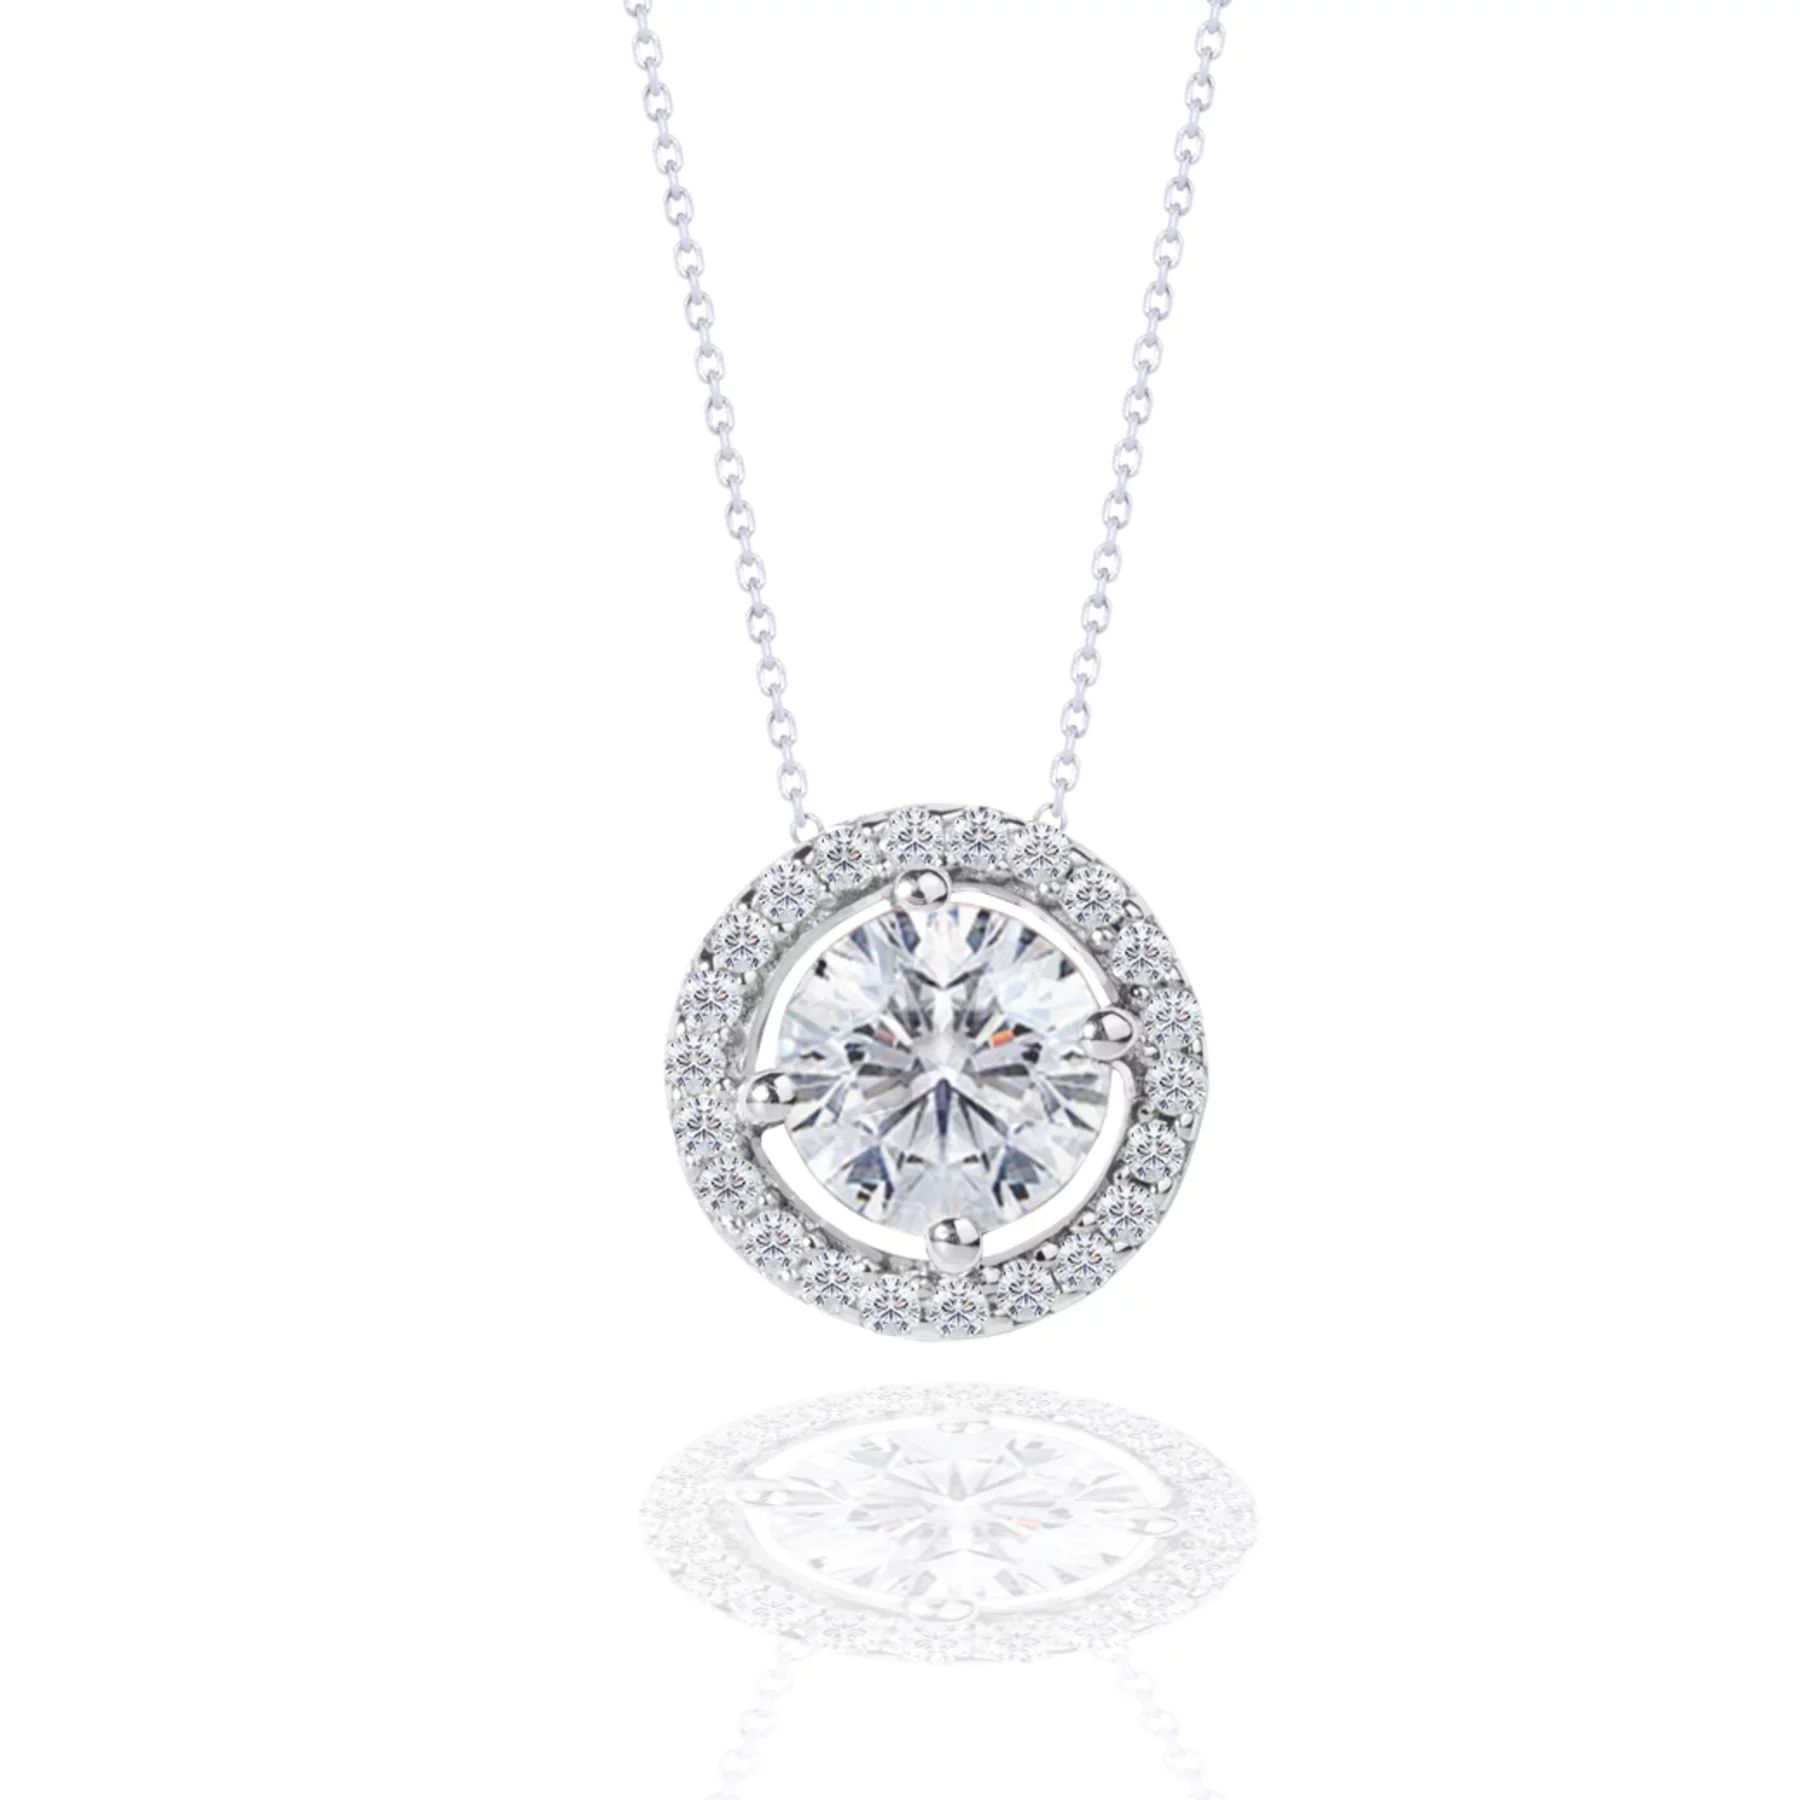 Solitaire 1.25 Carat Round Cut Halo Pendant Necklace 18k White Gold over Silver, Adult, Female | Walmart (US)